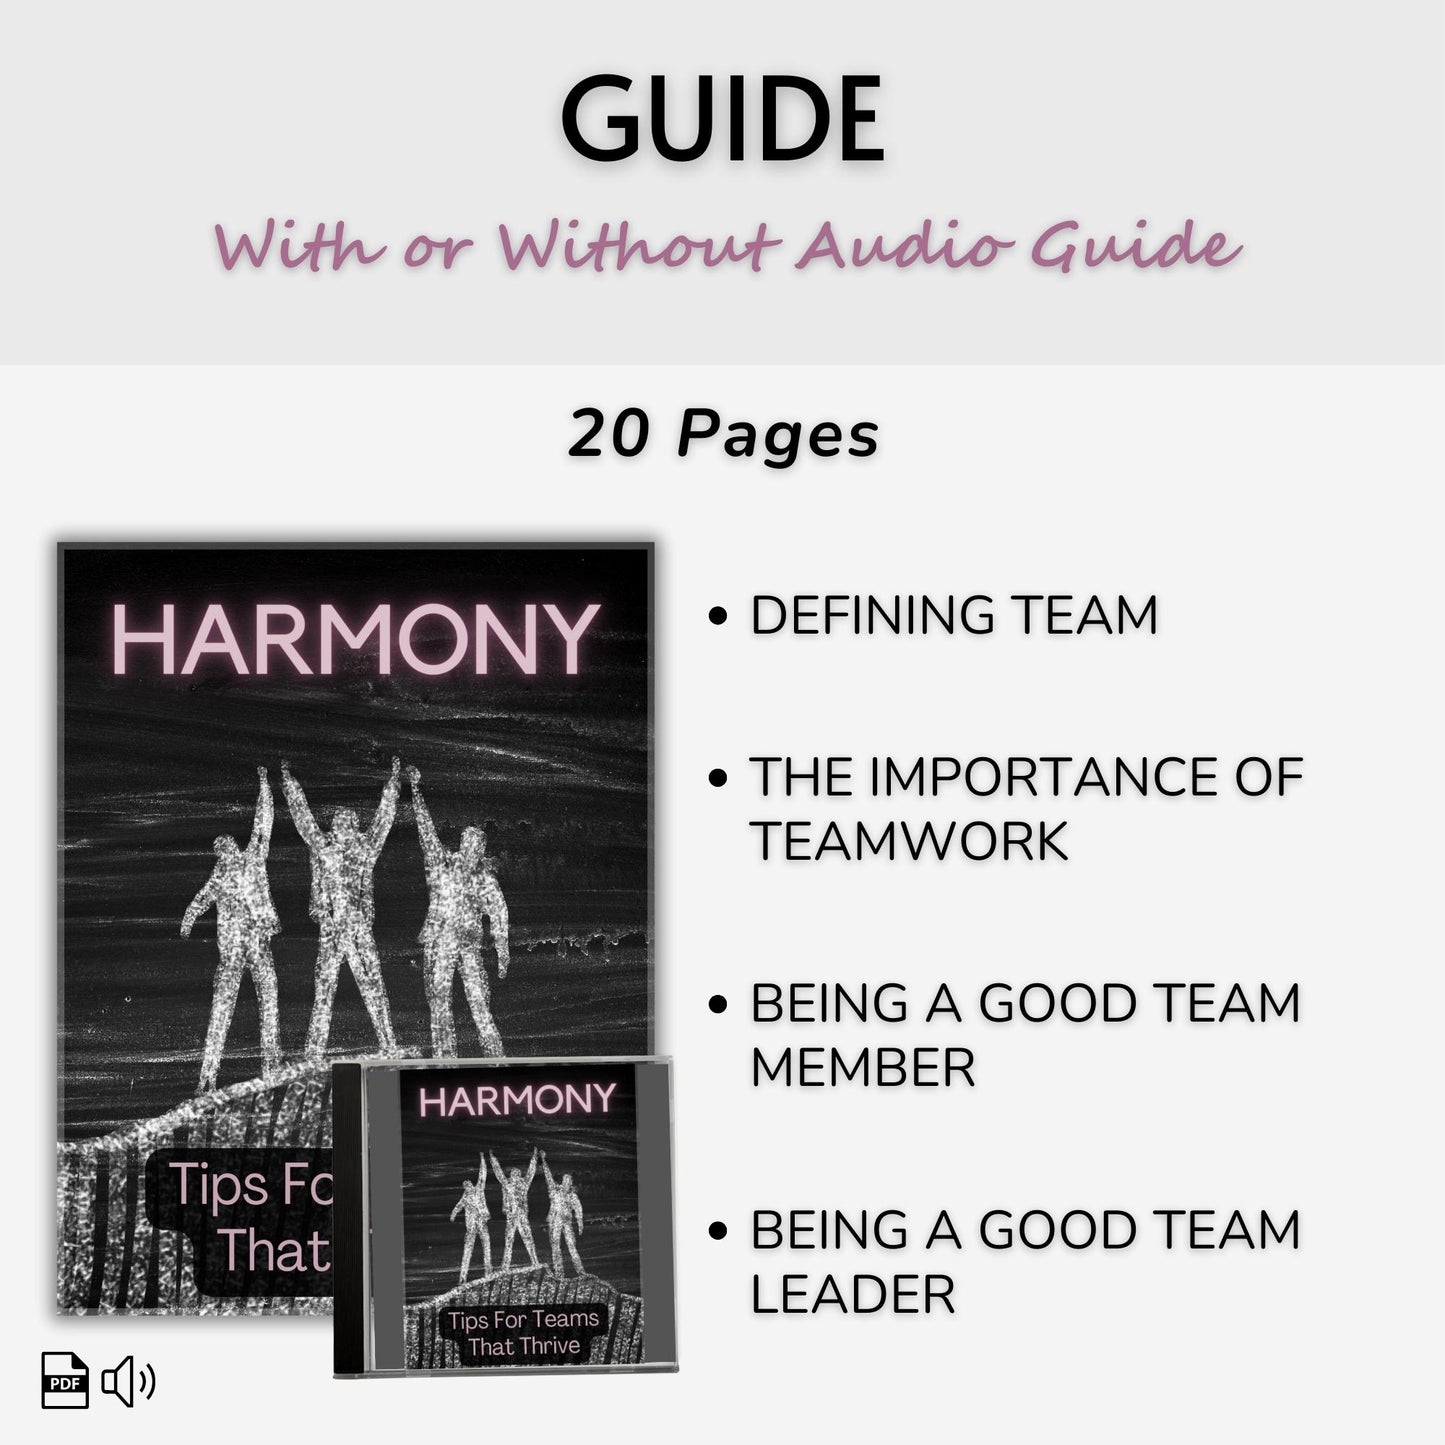 Harmony: Tips for Teams That Thrive